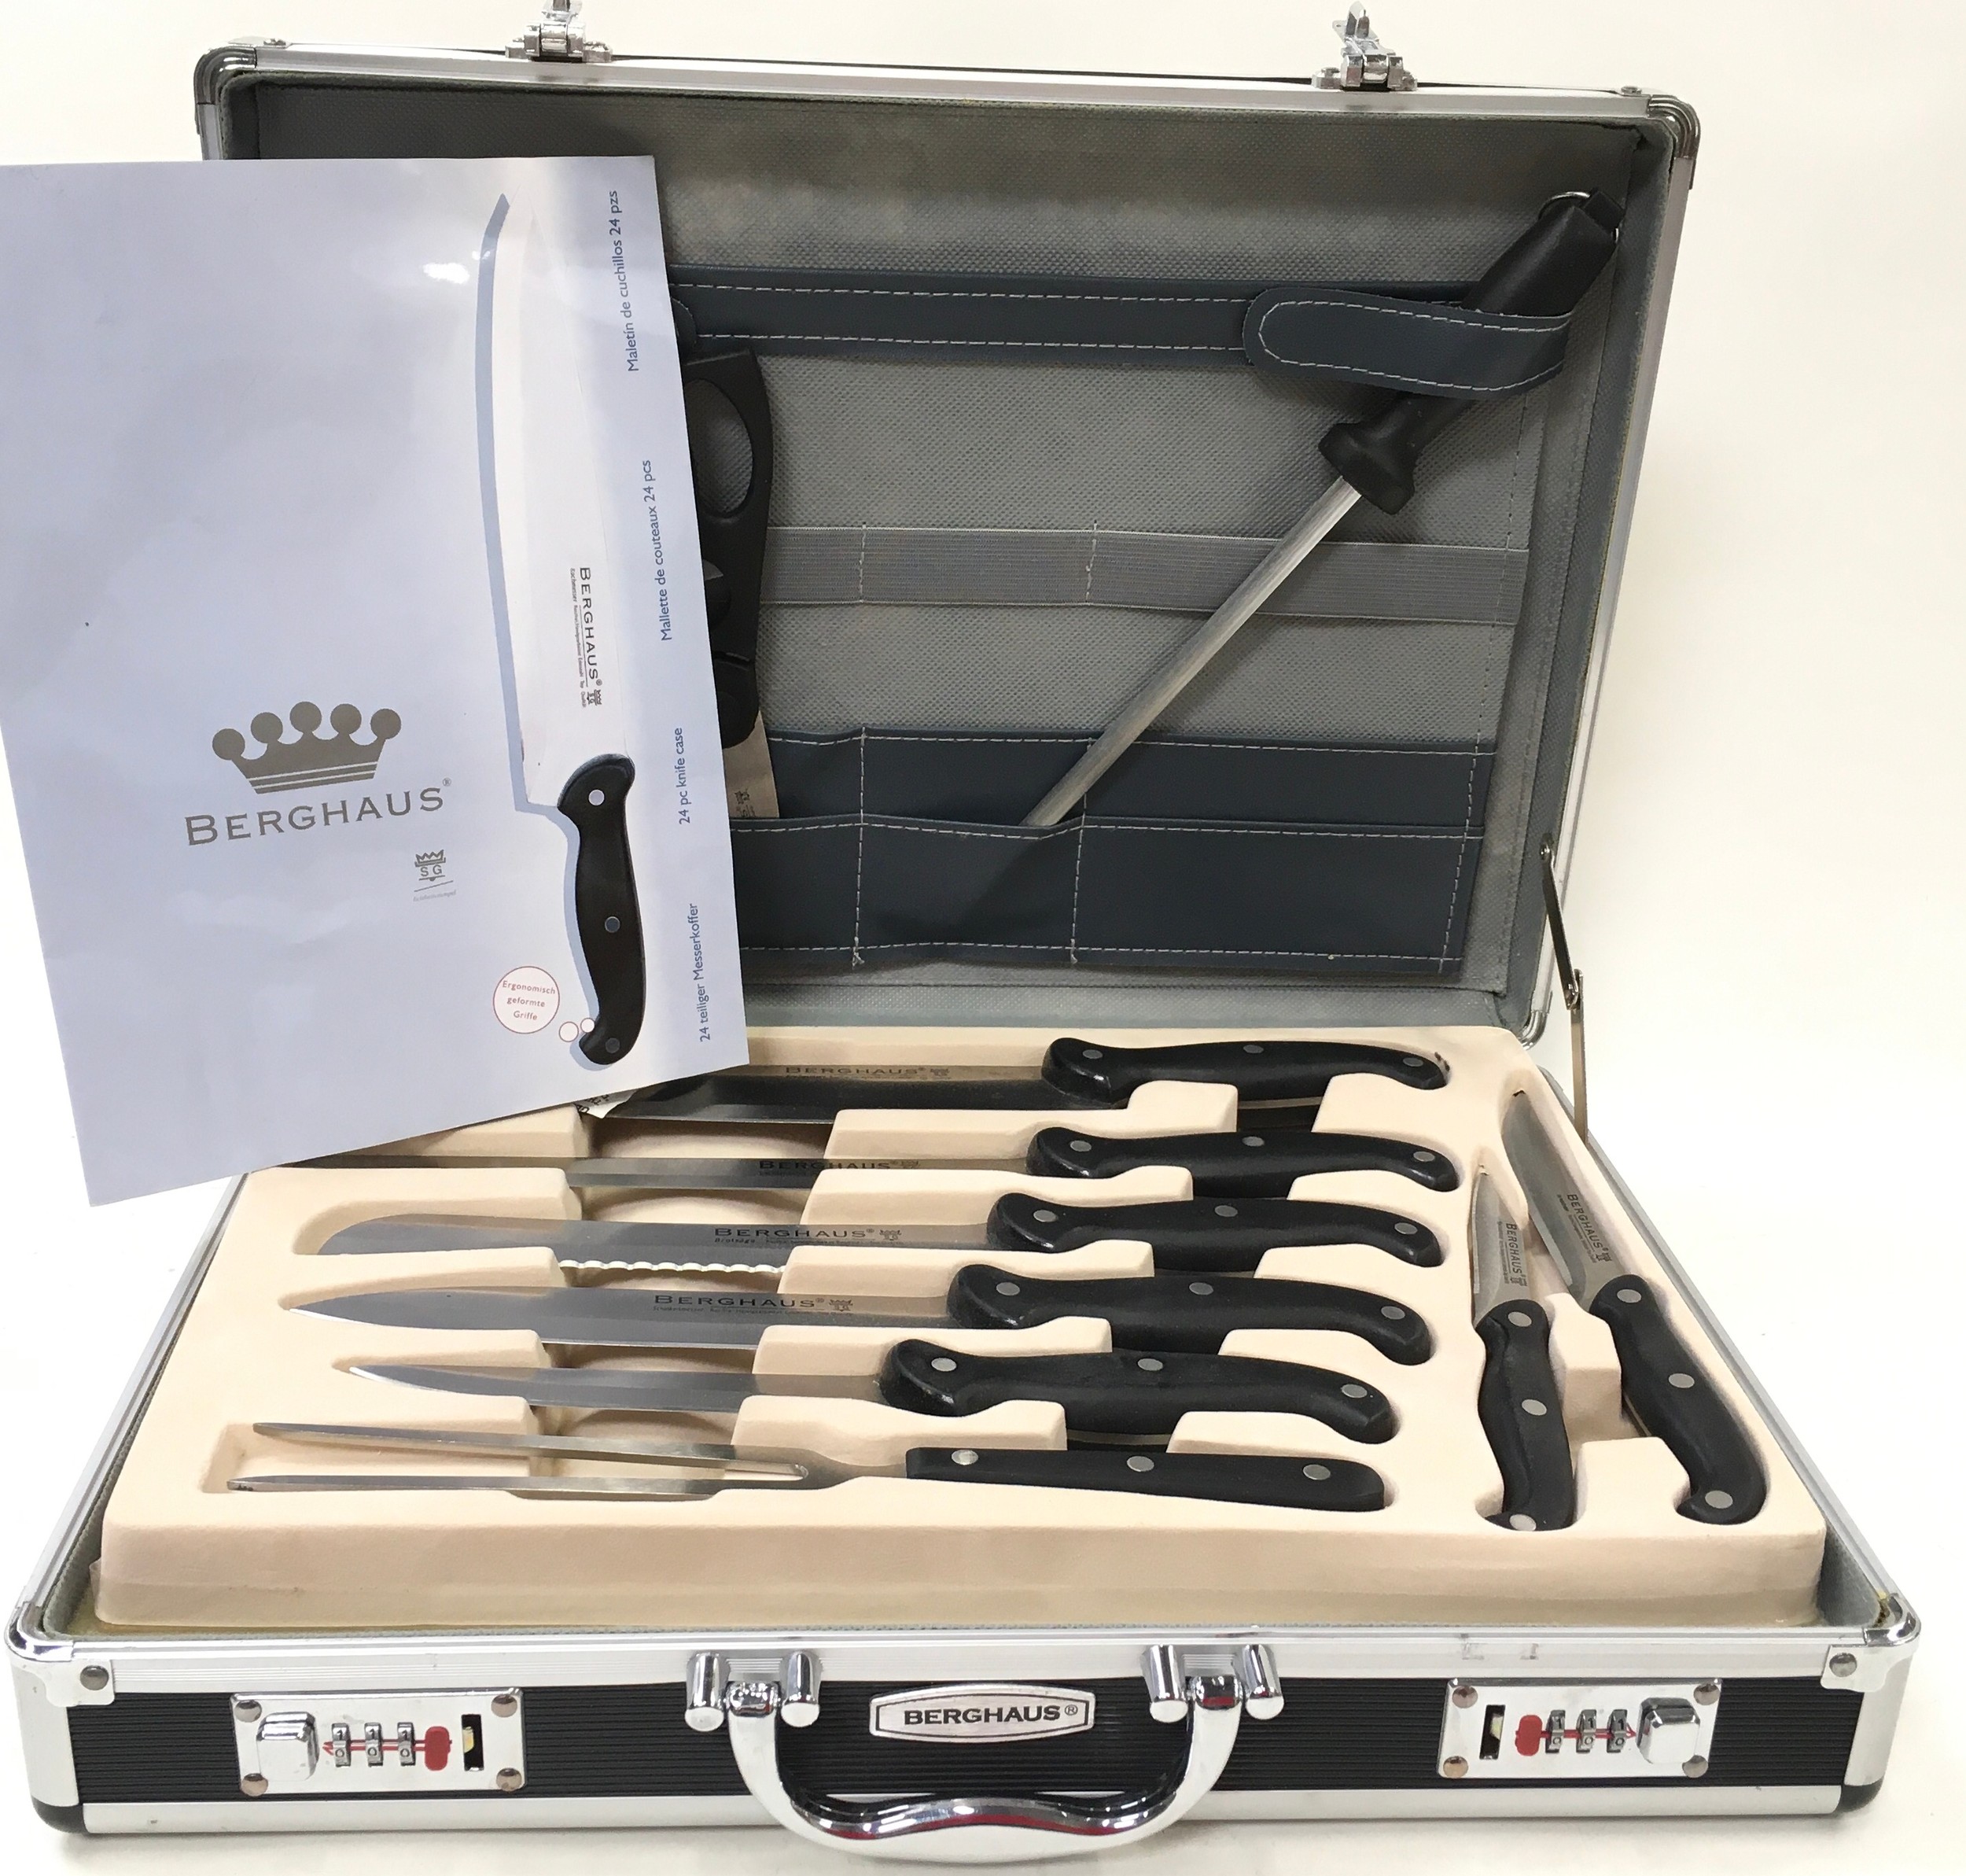 Quality Berghaus 24 piece knife set housed in a combination lock aluminium briefcase